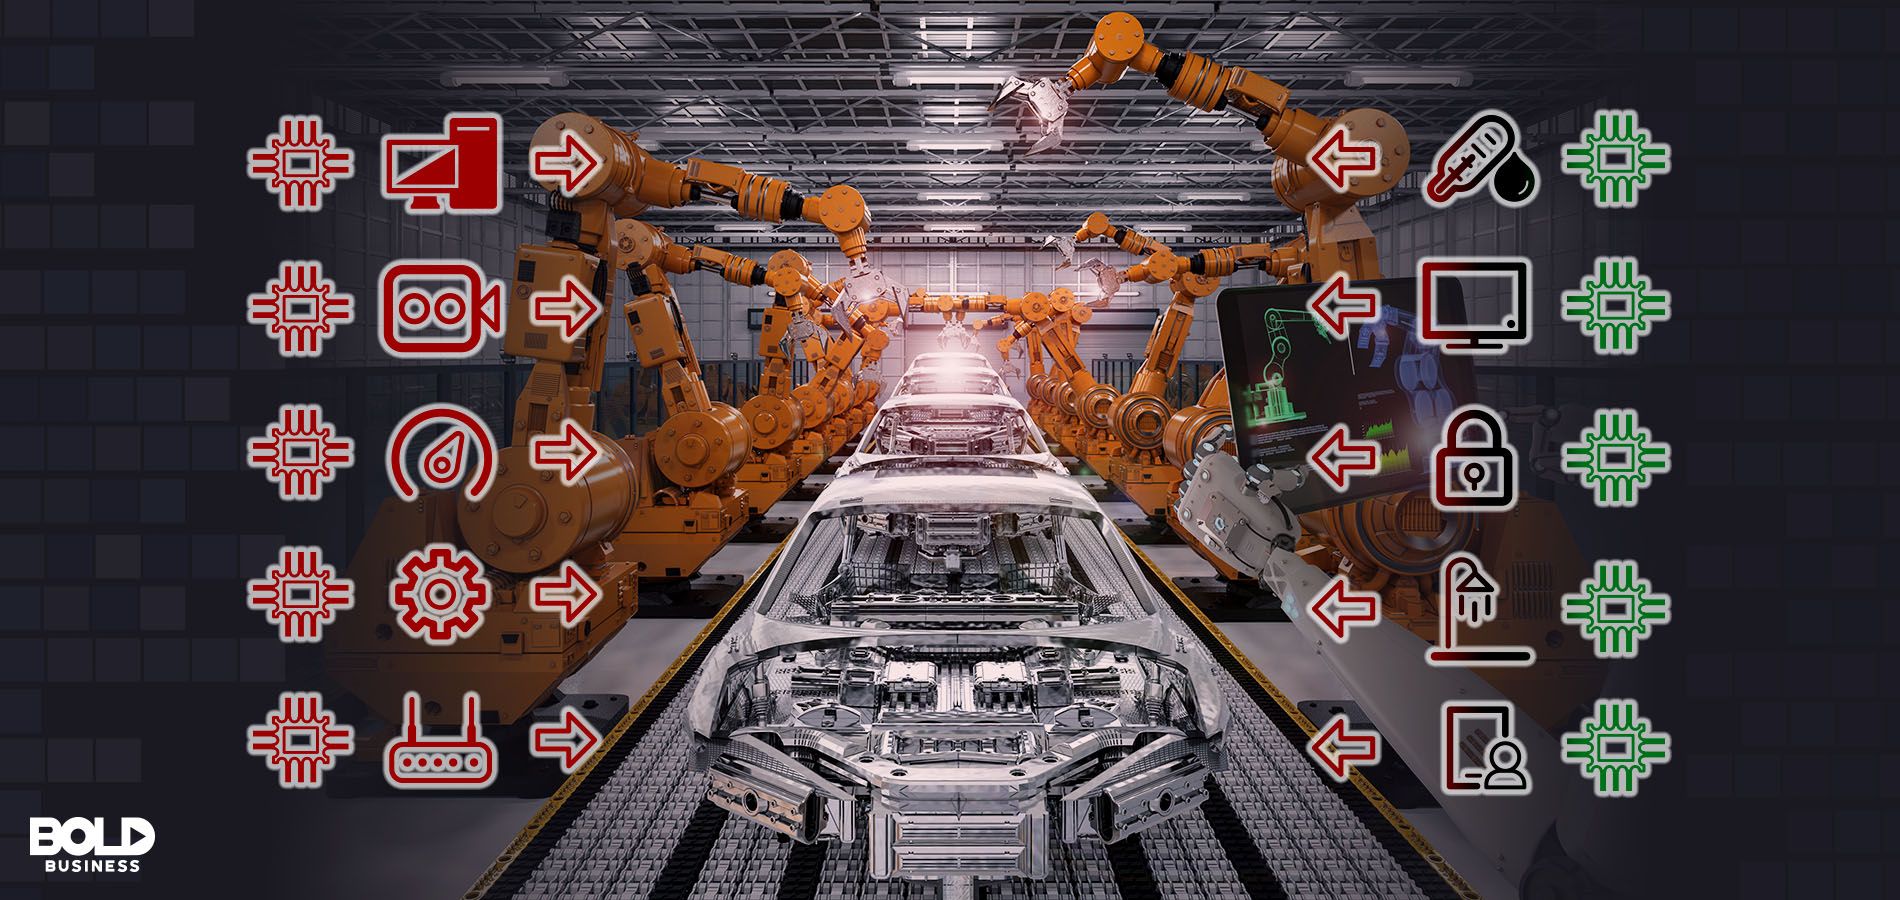 image of robotic arms assembling a machine